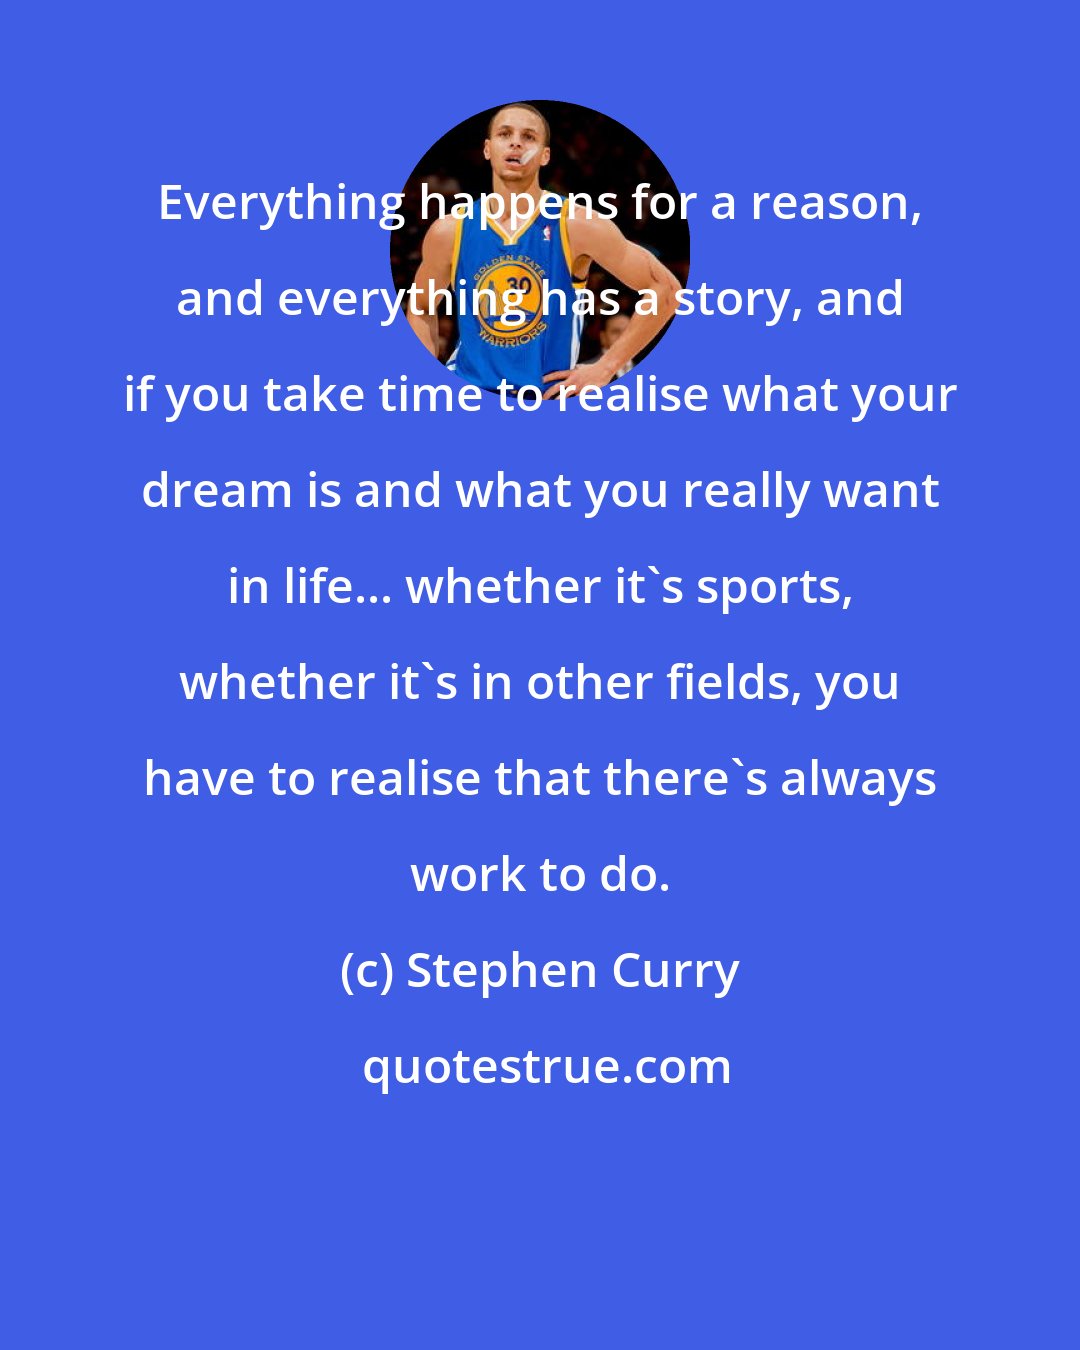 Stephen Curry: Everything happens for a reason, and everything has a story, and if you take time to realise what your dream is and what you really want in life... whether it's sports, whether it's in other fields, you have to realise that there's always work to do.